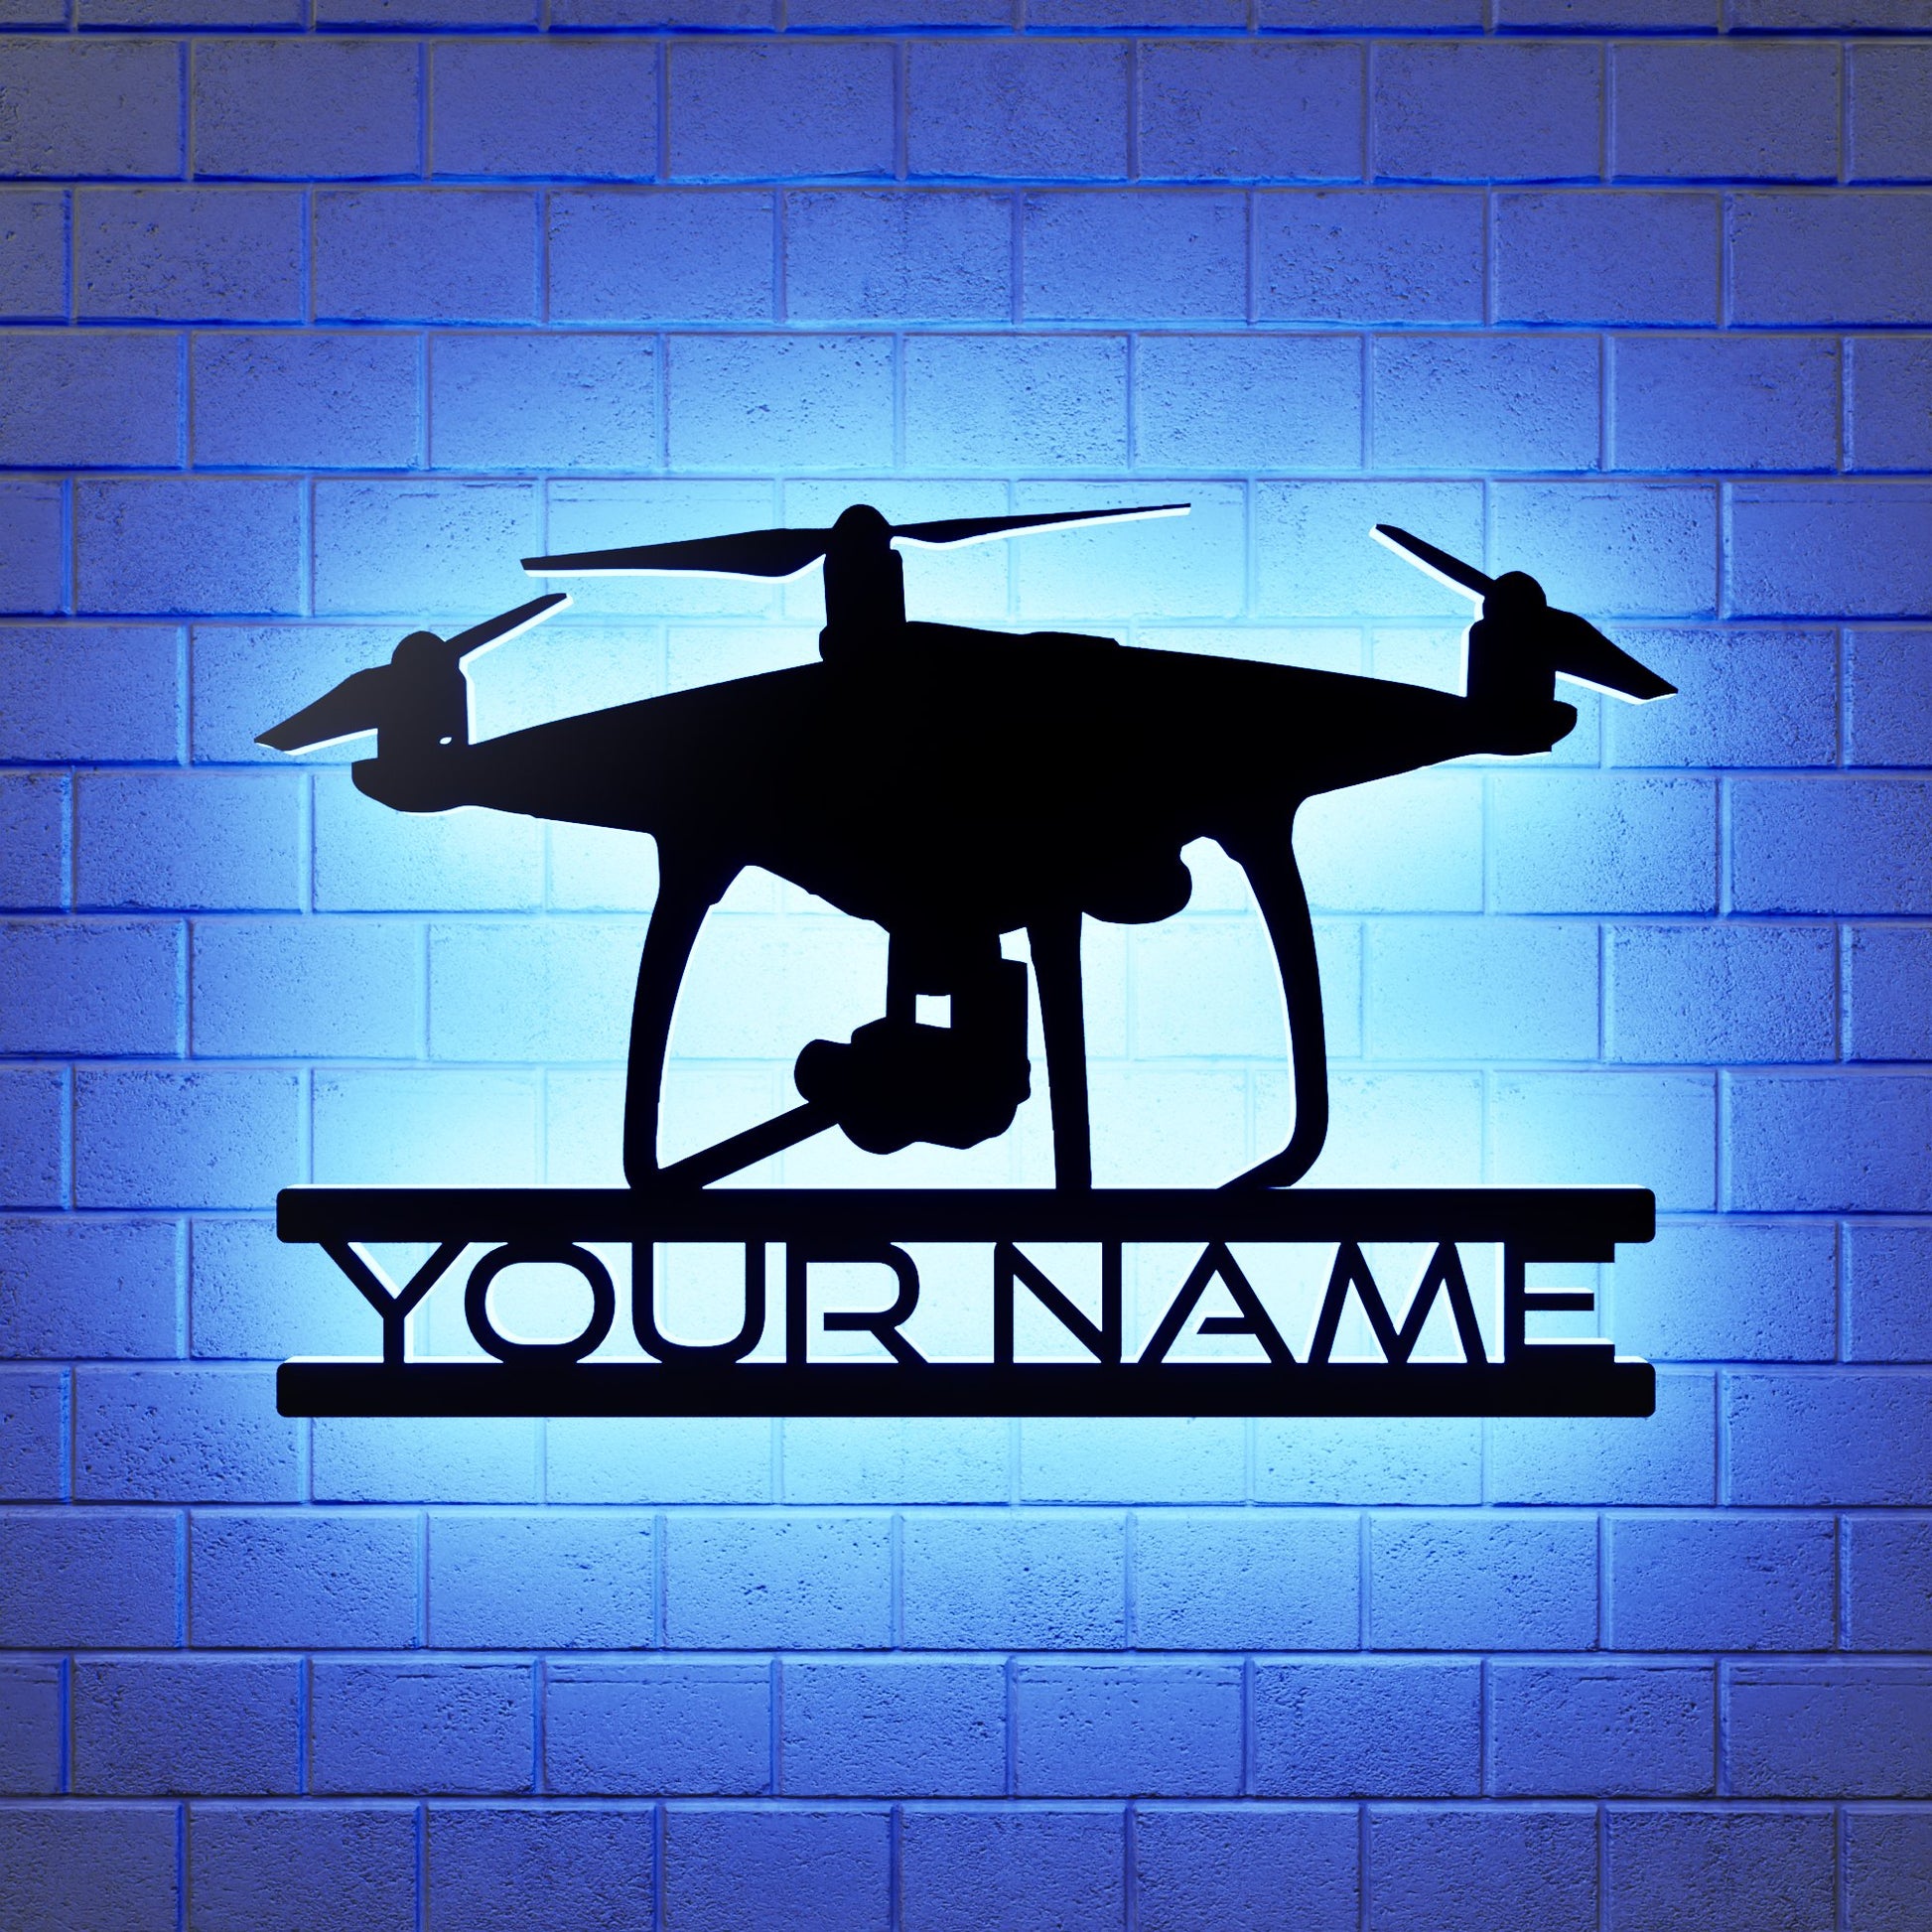 Drone Led Wall Sign Personalized - RGB Lighted - Kutalp